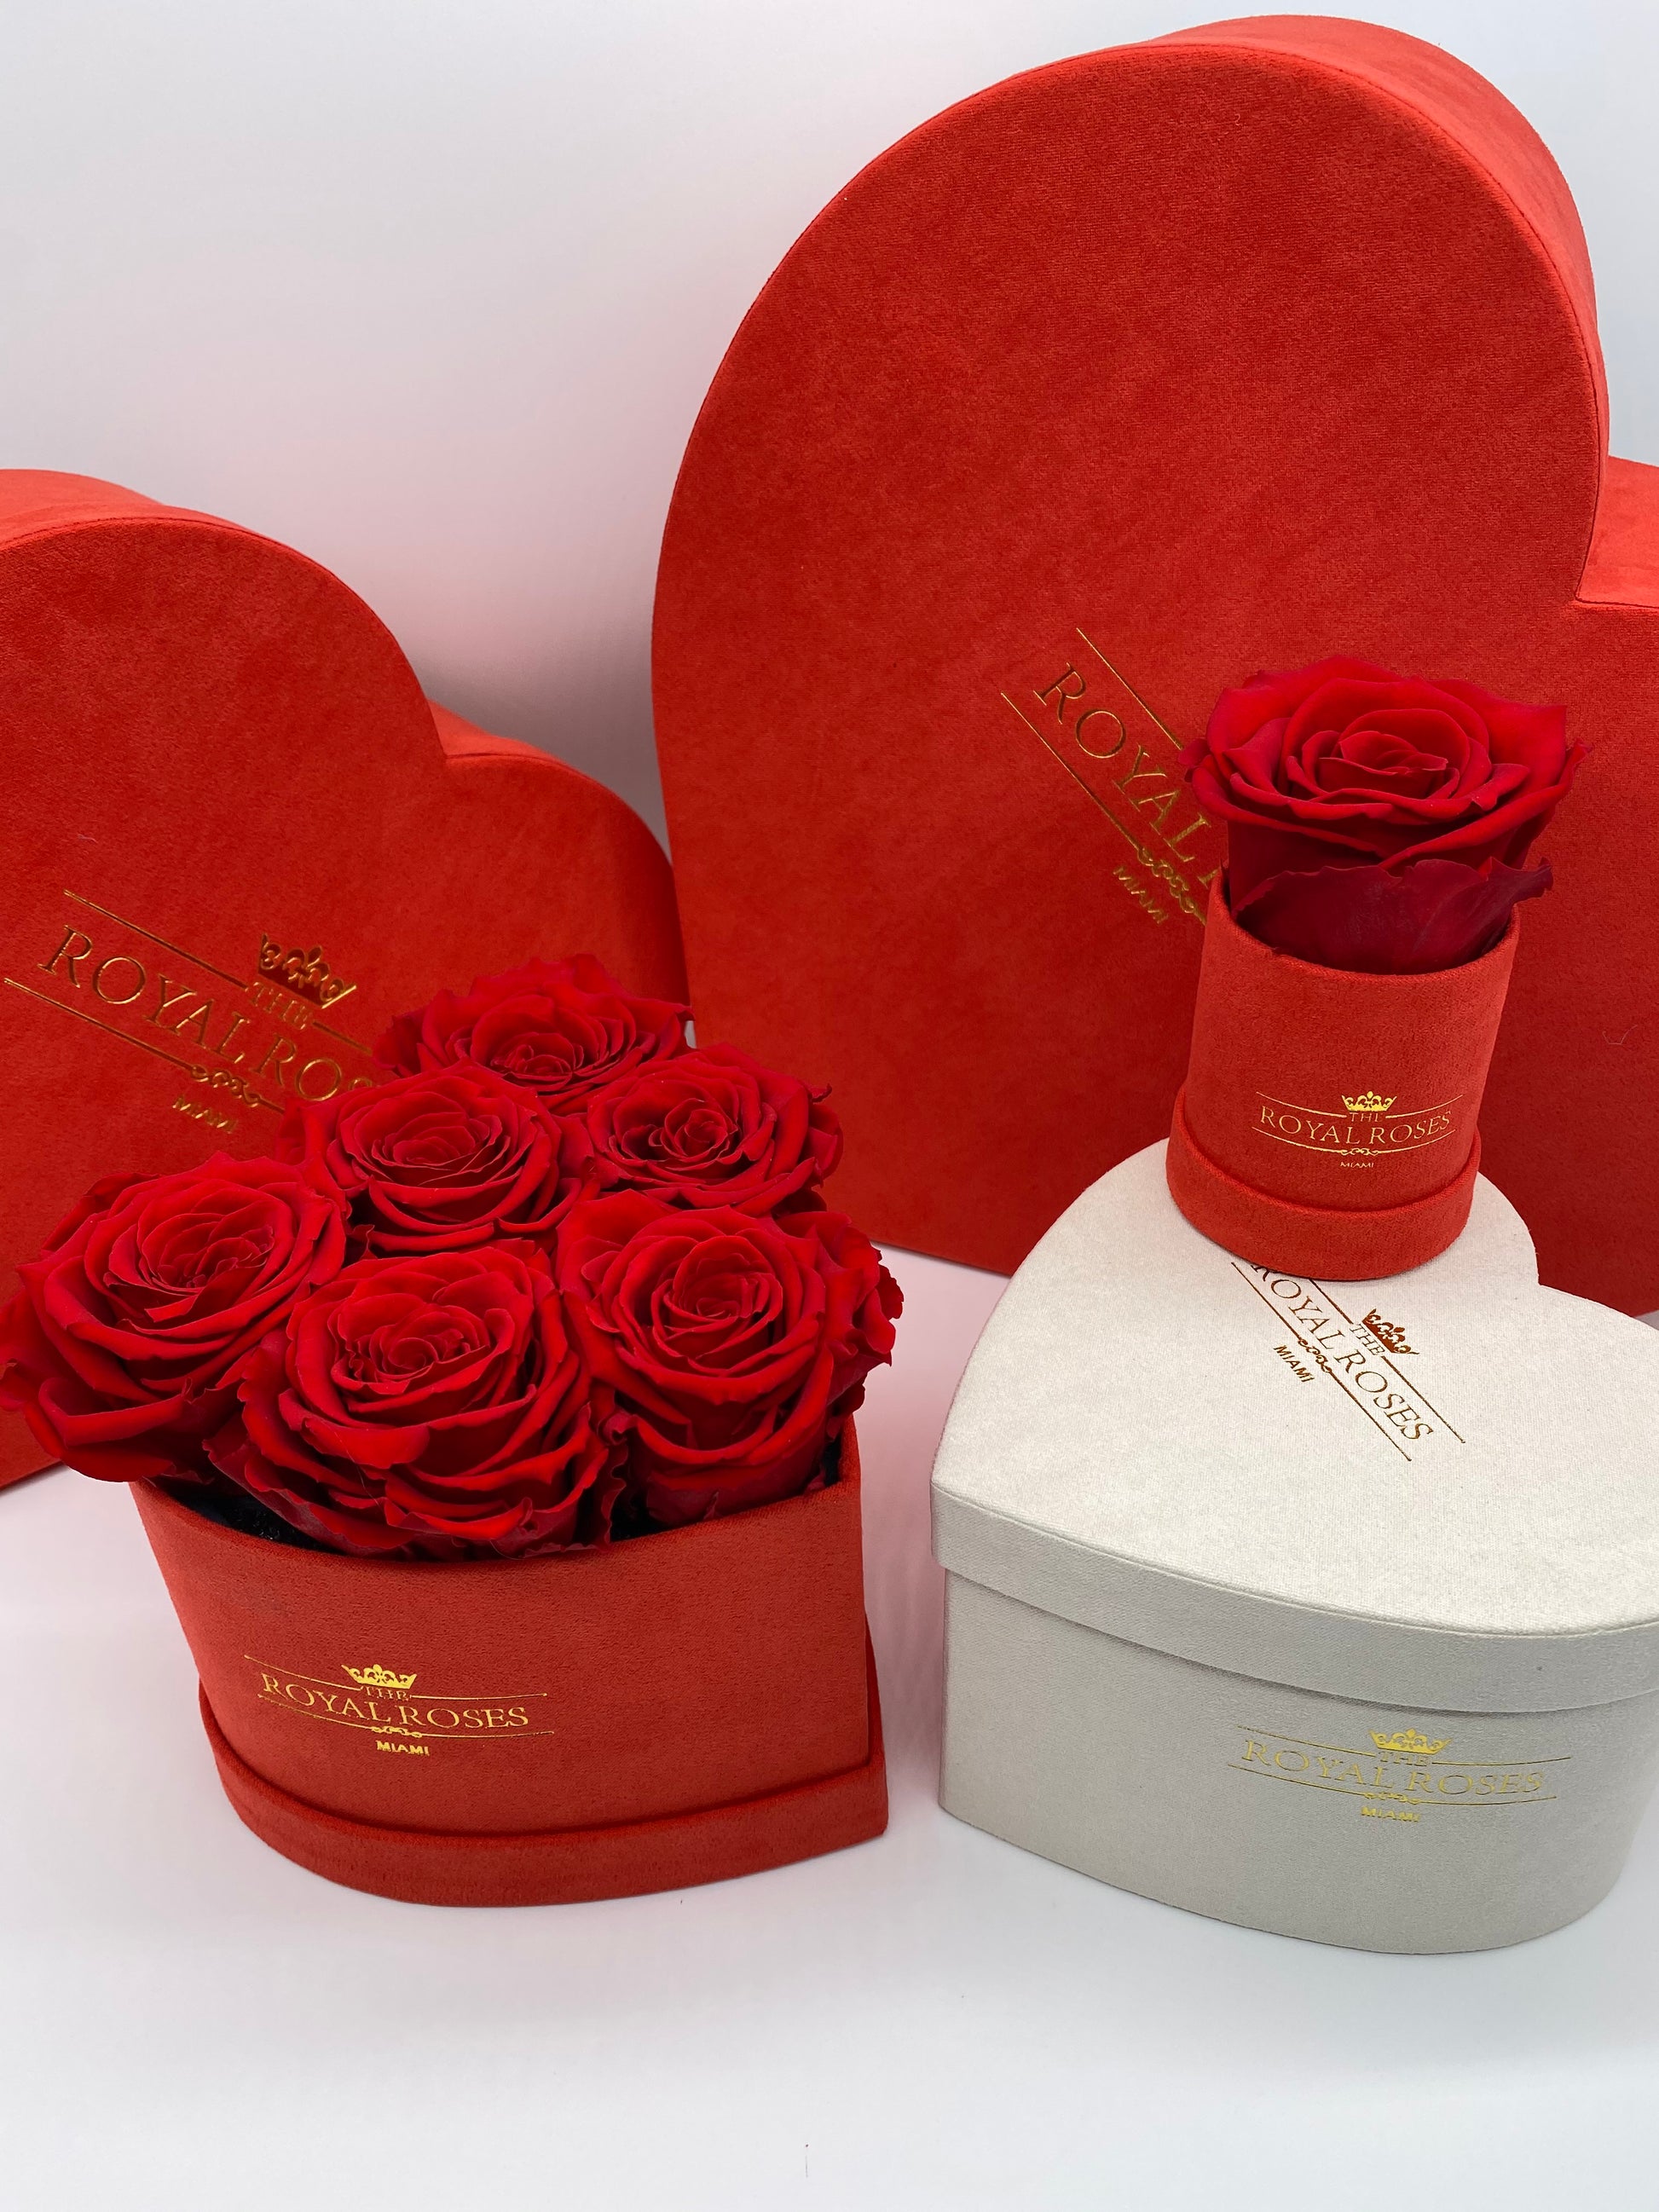 Real Long Lasting Roses - Mini Heart Shaped Box - Lifetime is Over 1 Year - The Royal Roses 